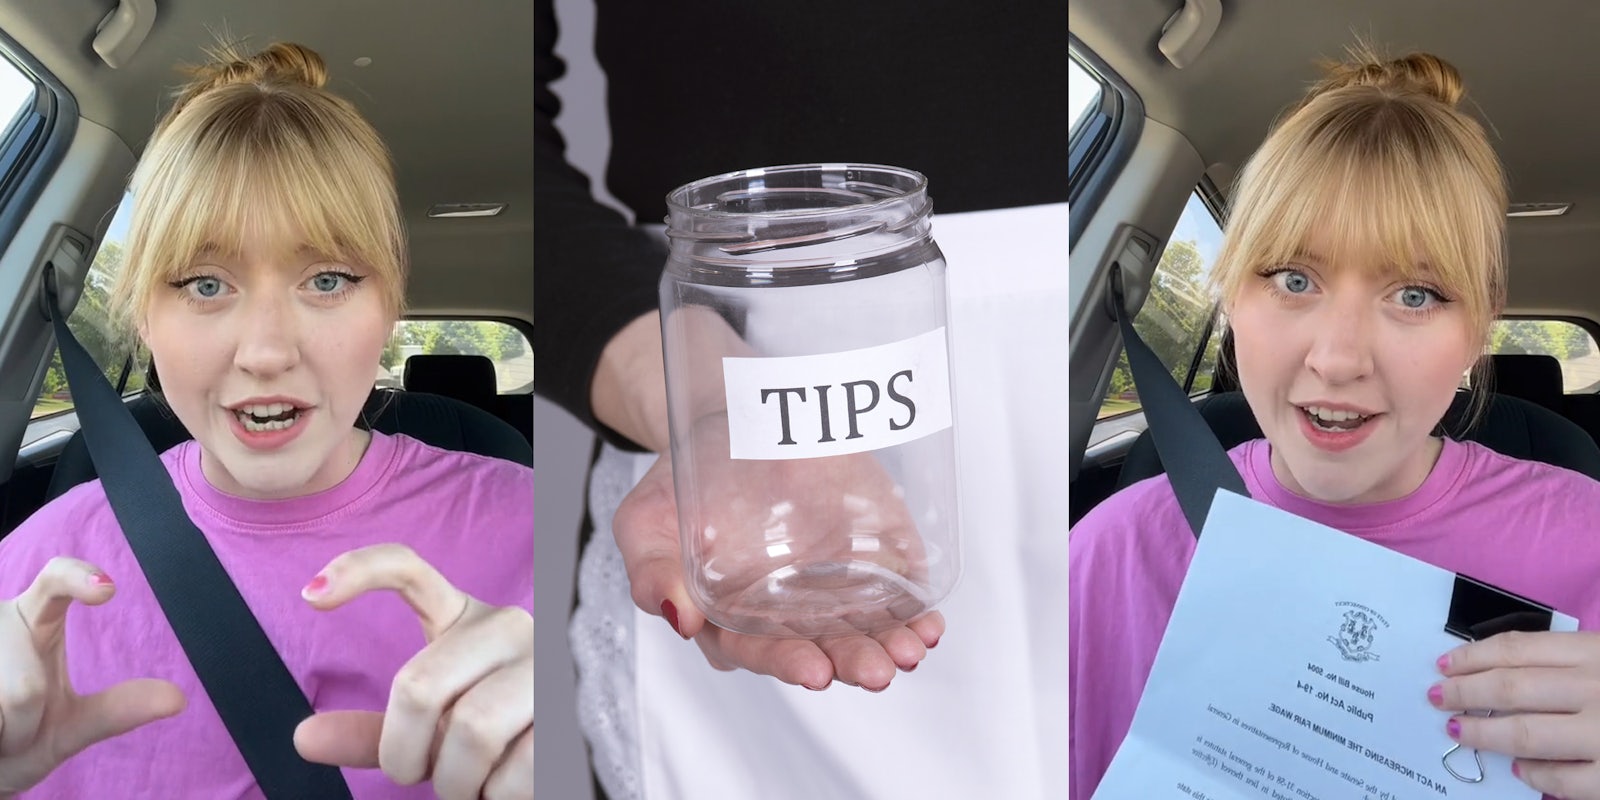 waitress speaking in car (l) Waitress holding up empty tip jar (c) waitress speaking in car holding papers (r)